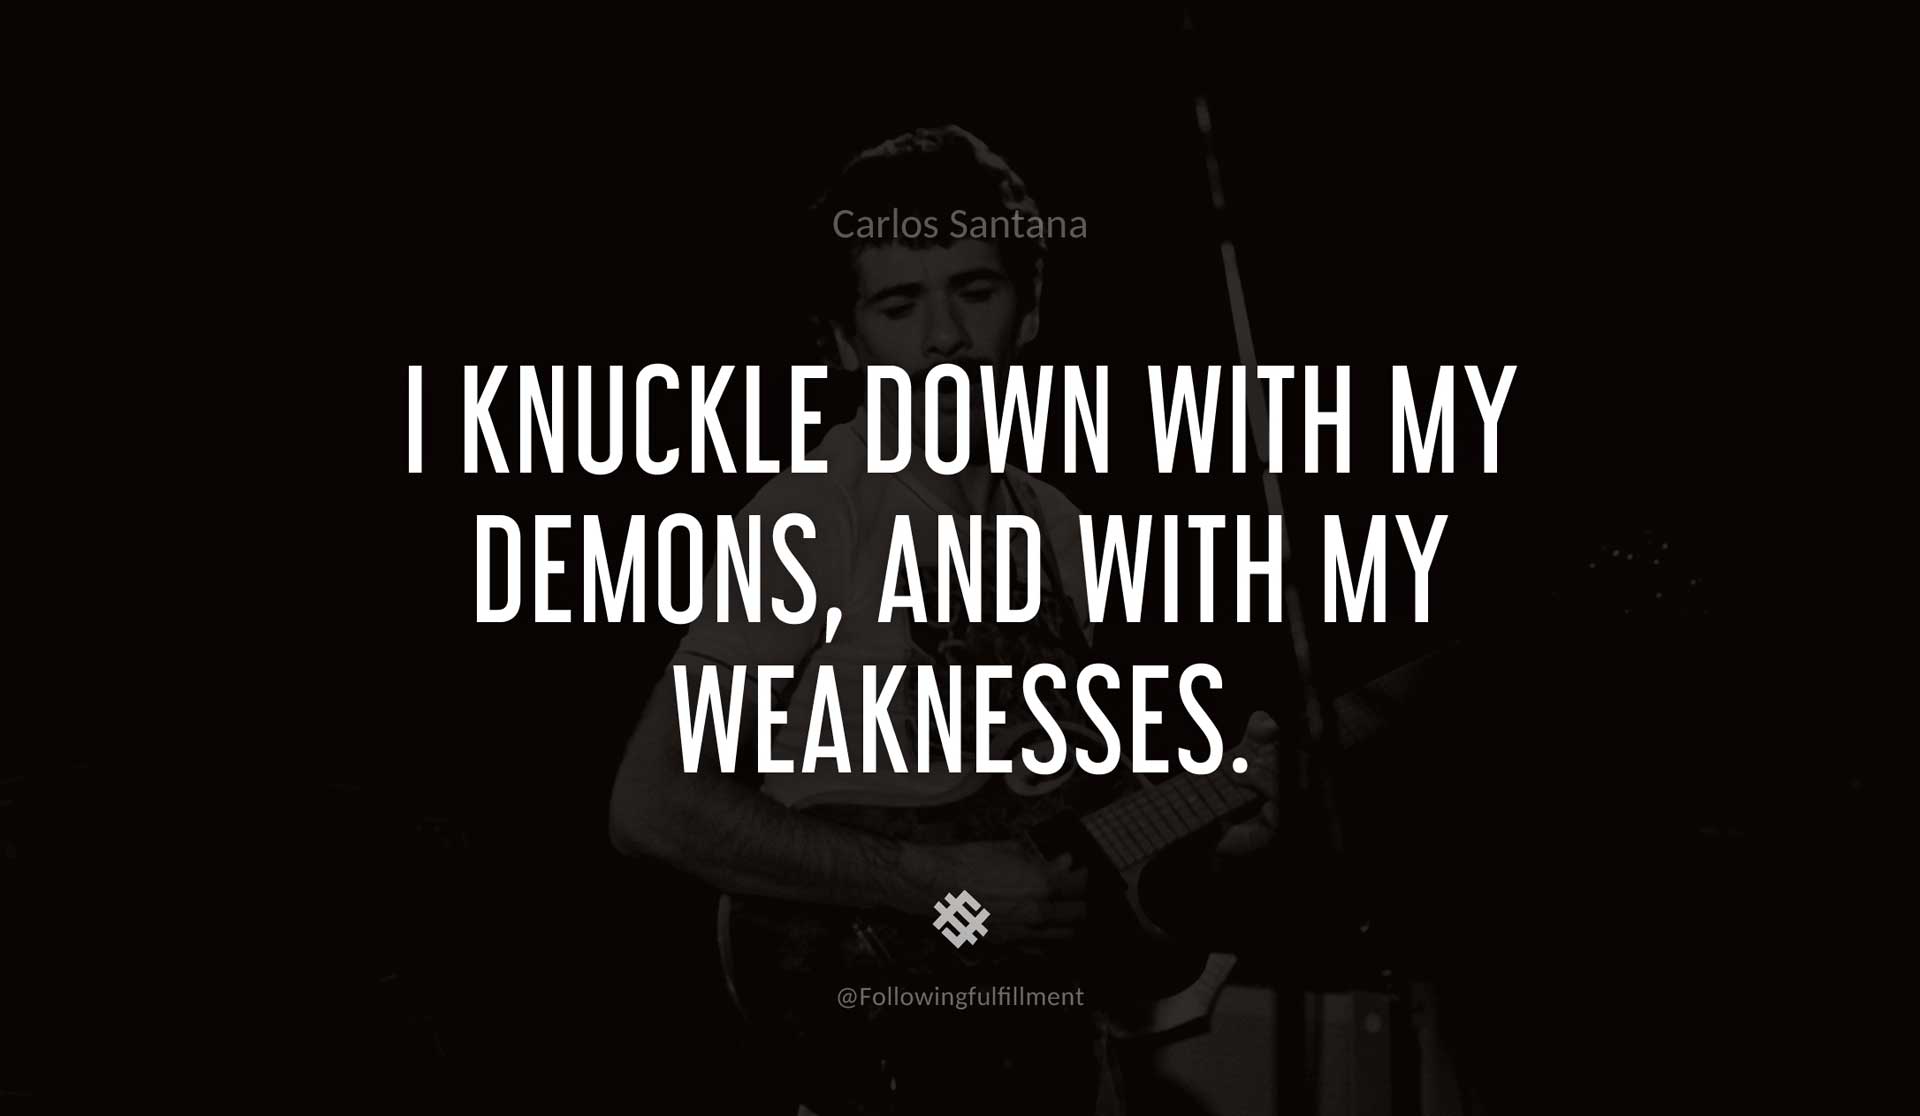 I-knuckle-down-with-my-demons,-and-with-my-weaknesses.-CARLOS-SANTANA-Quote.jpg